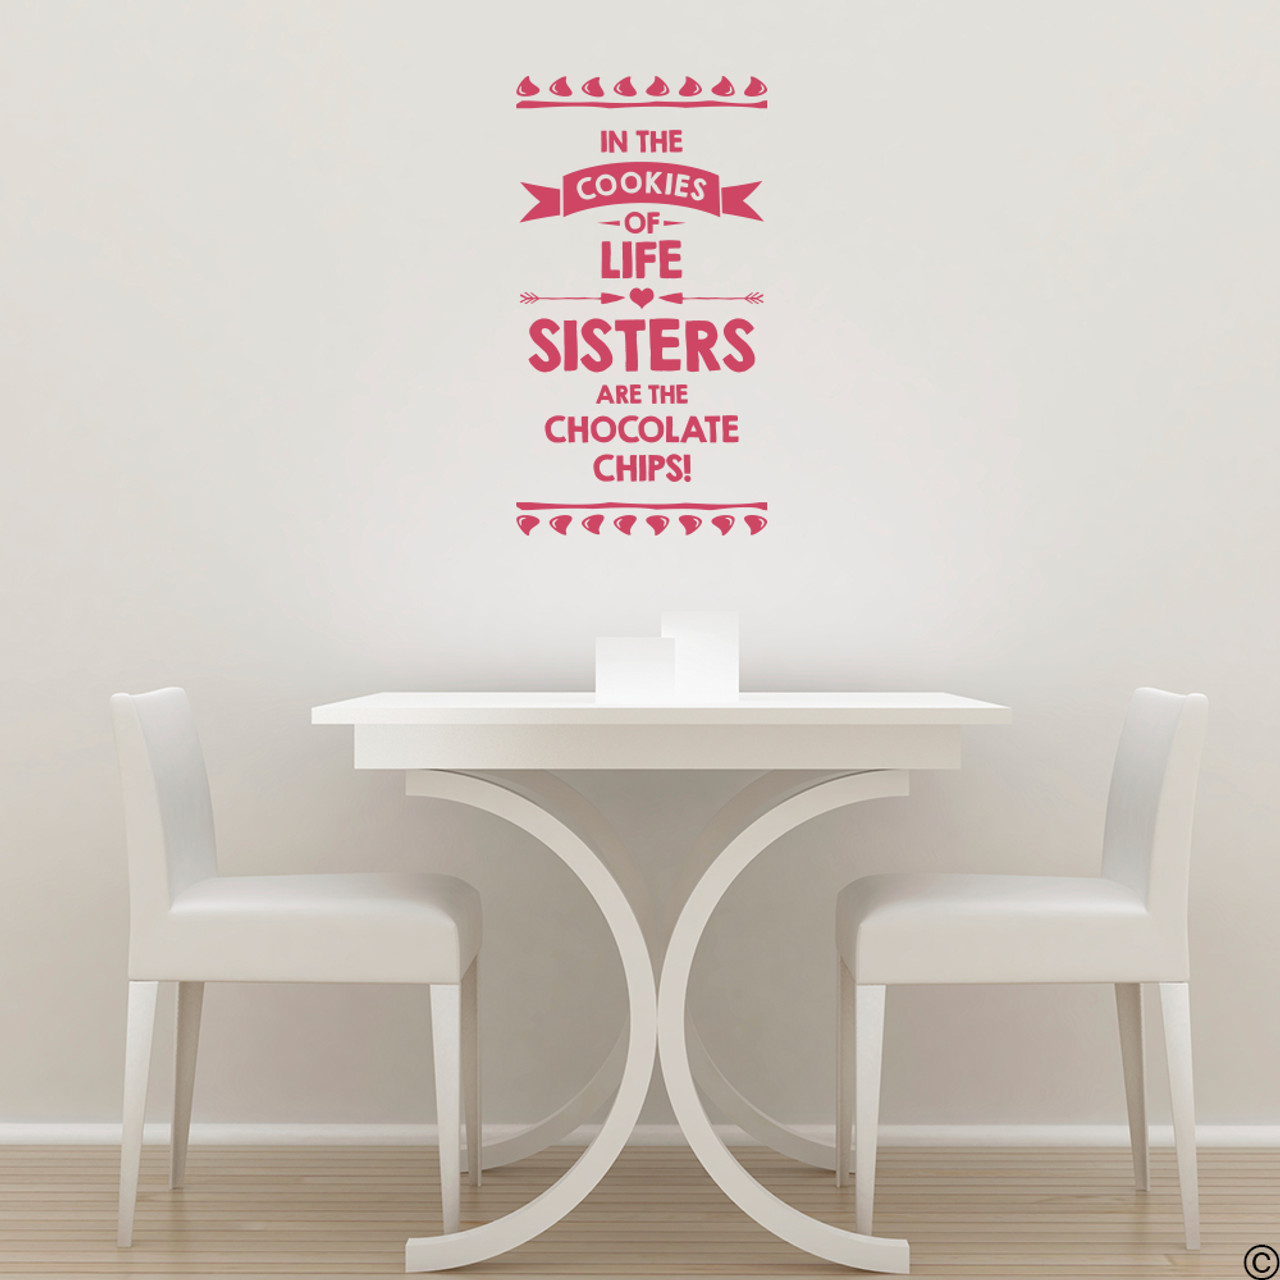 "In The Cookies of Life Sisters are the Chocolate Chips," vinyl wall decal quote in lipstick